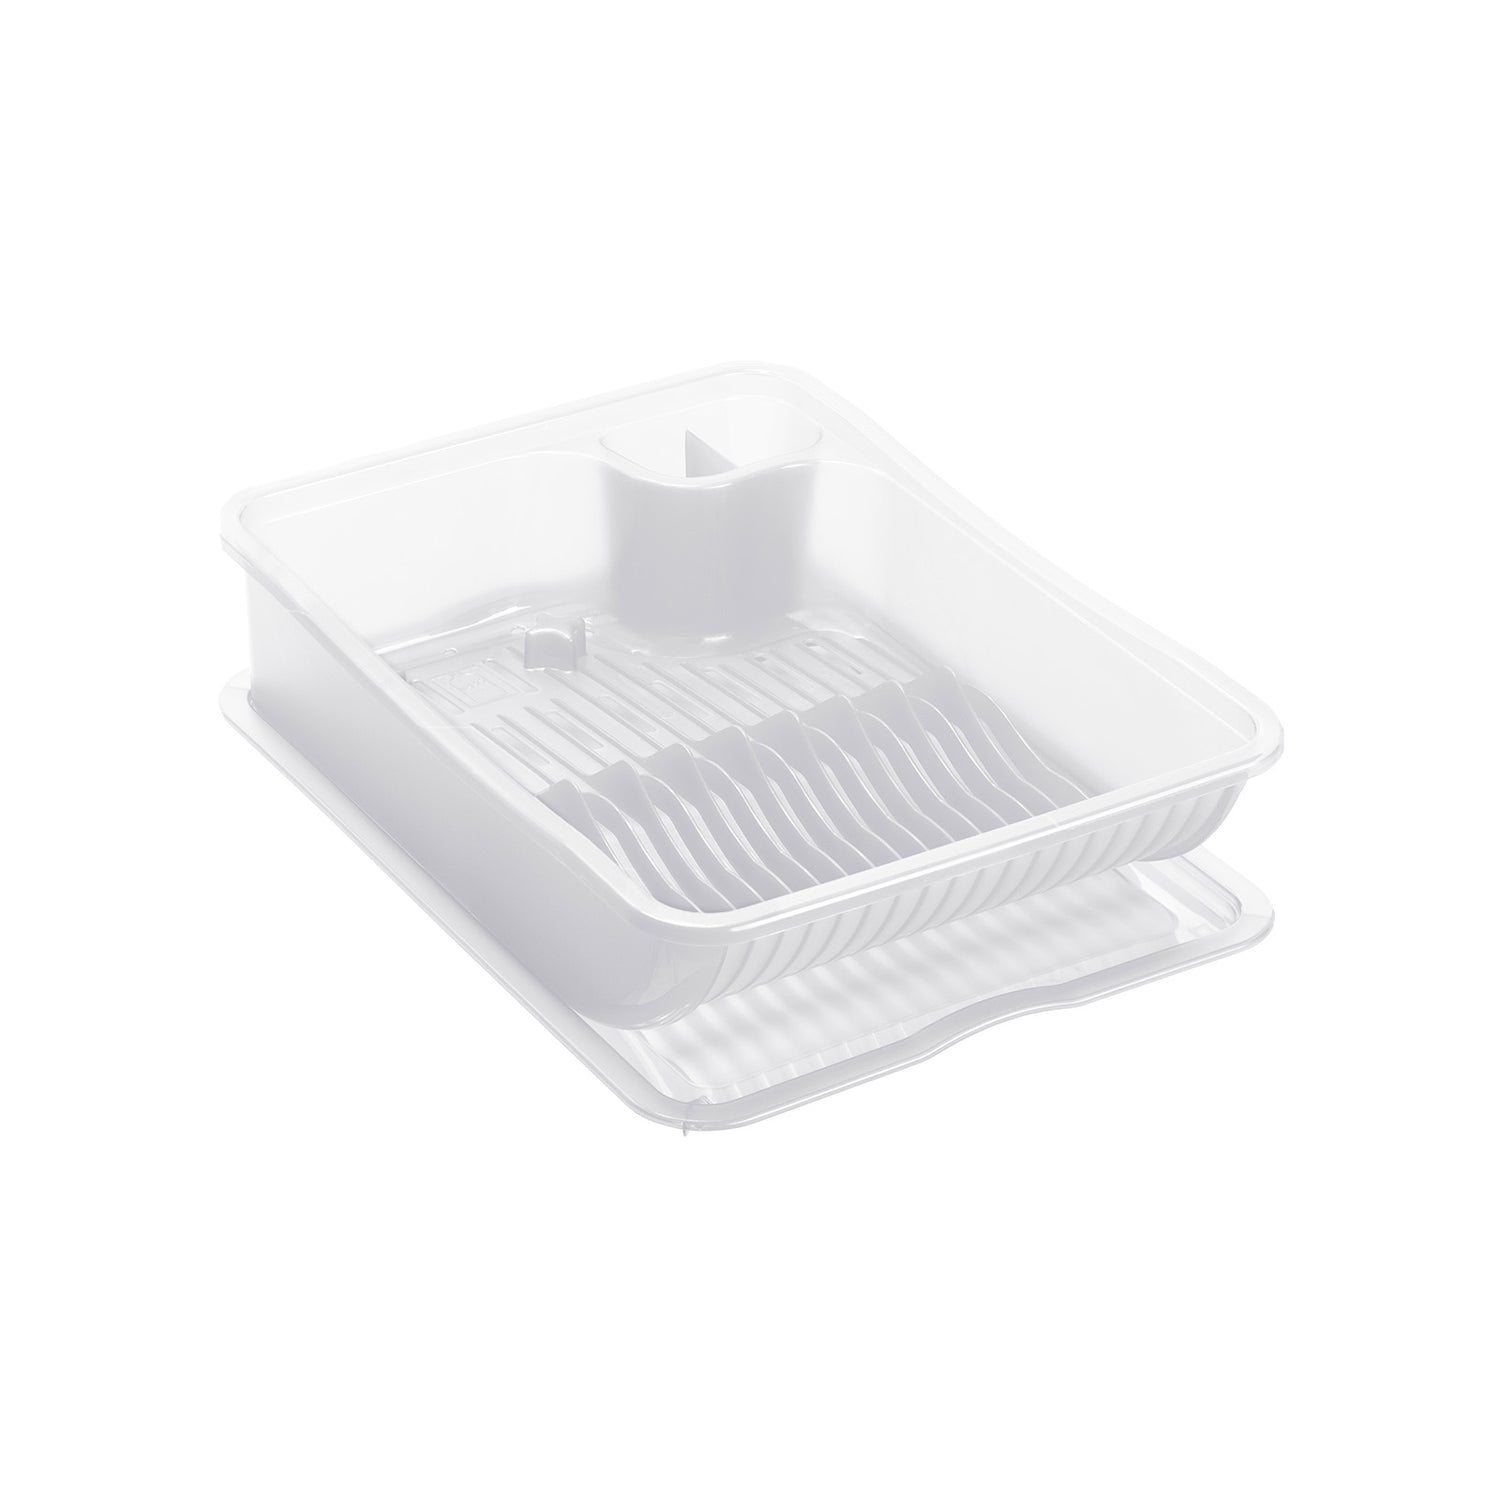 Dish Drainer With Drip Tray l SPACEWONDER